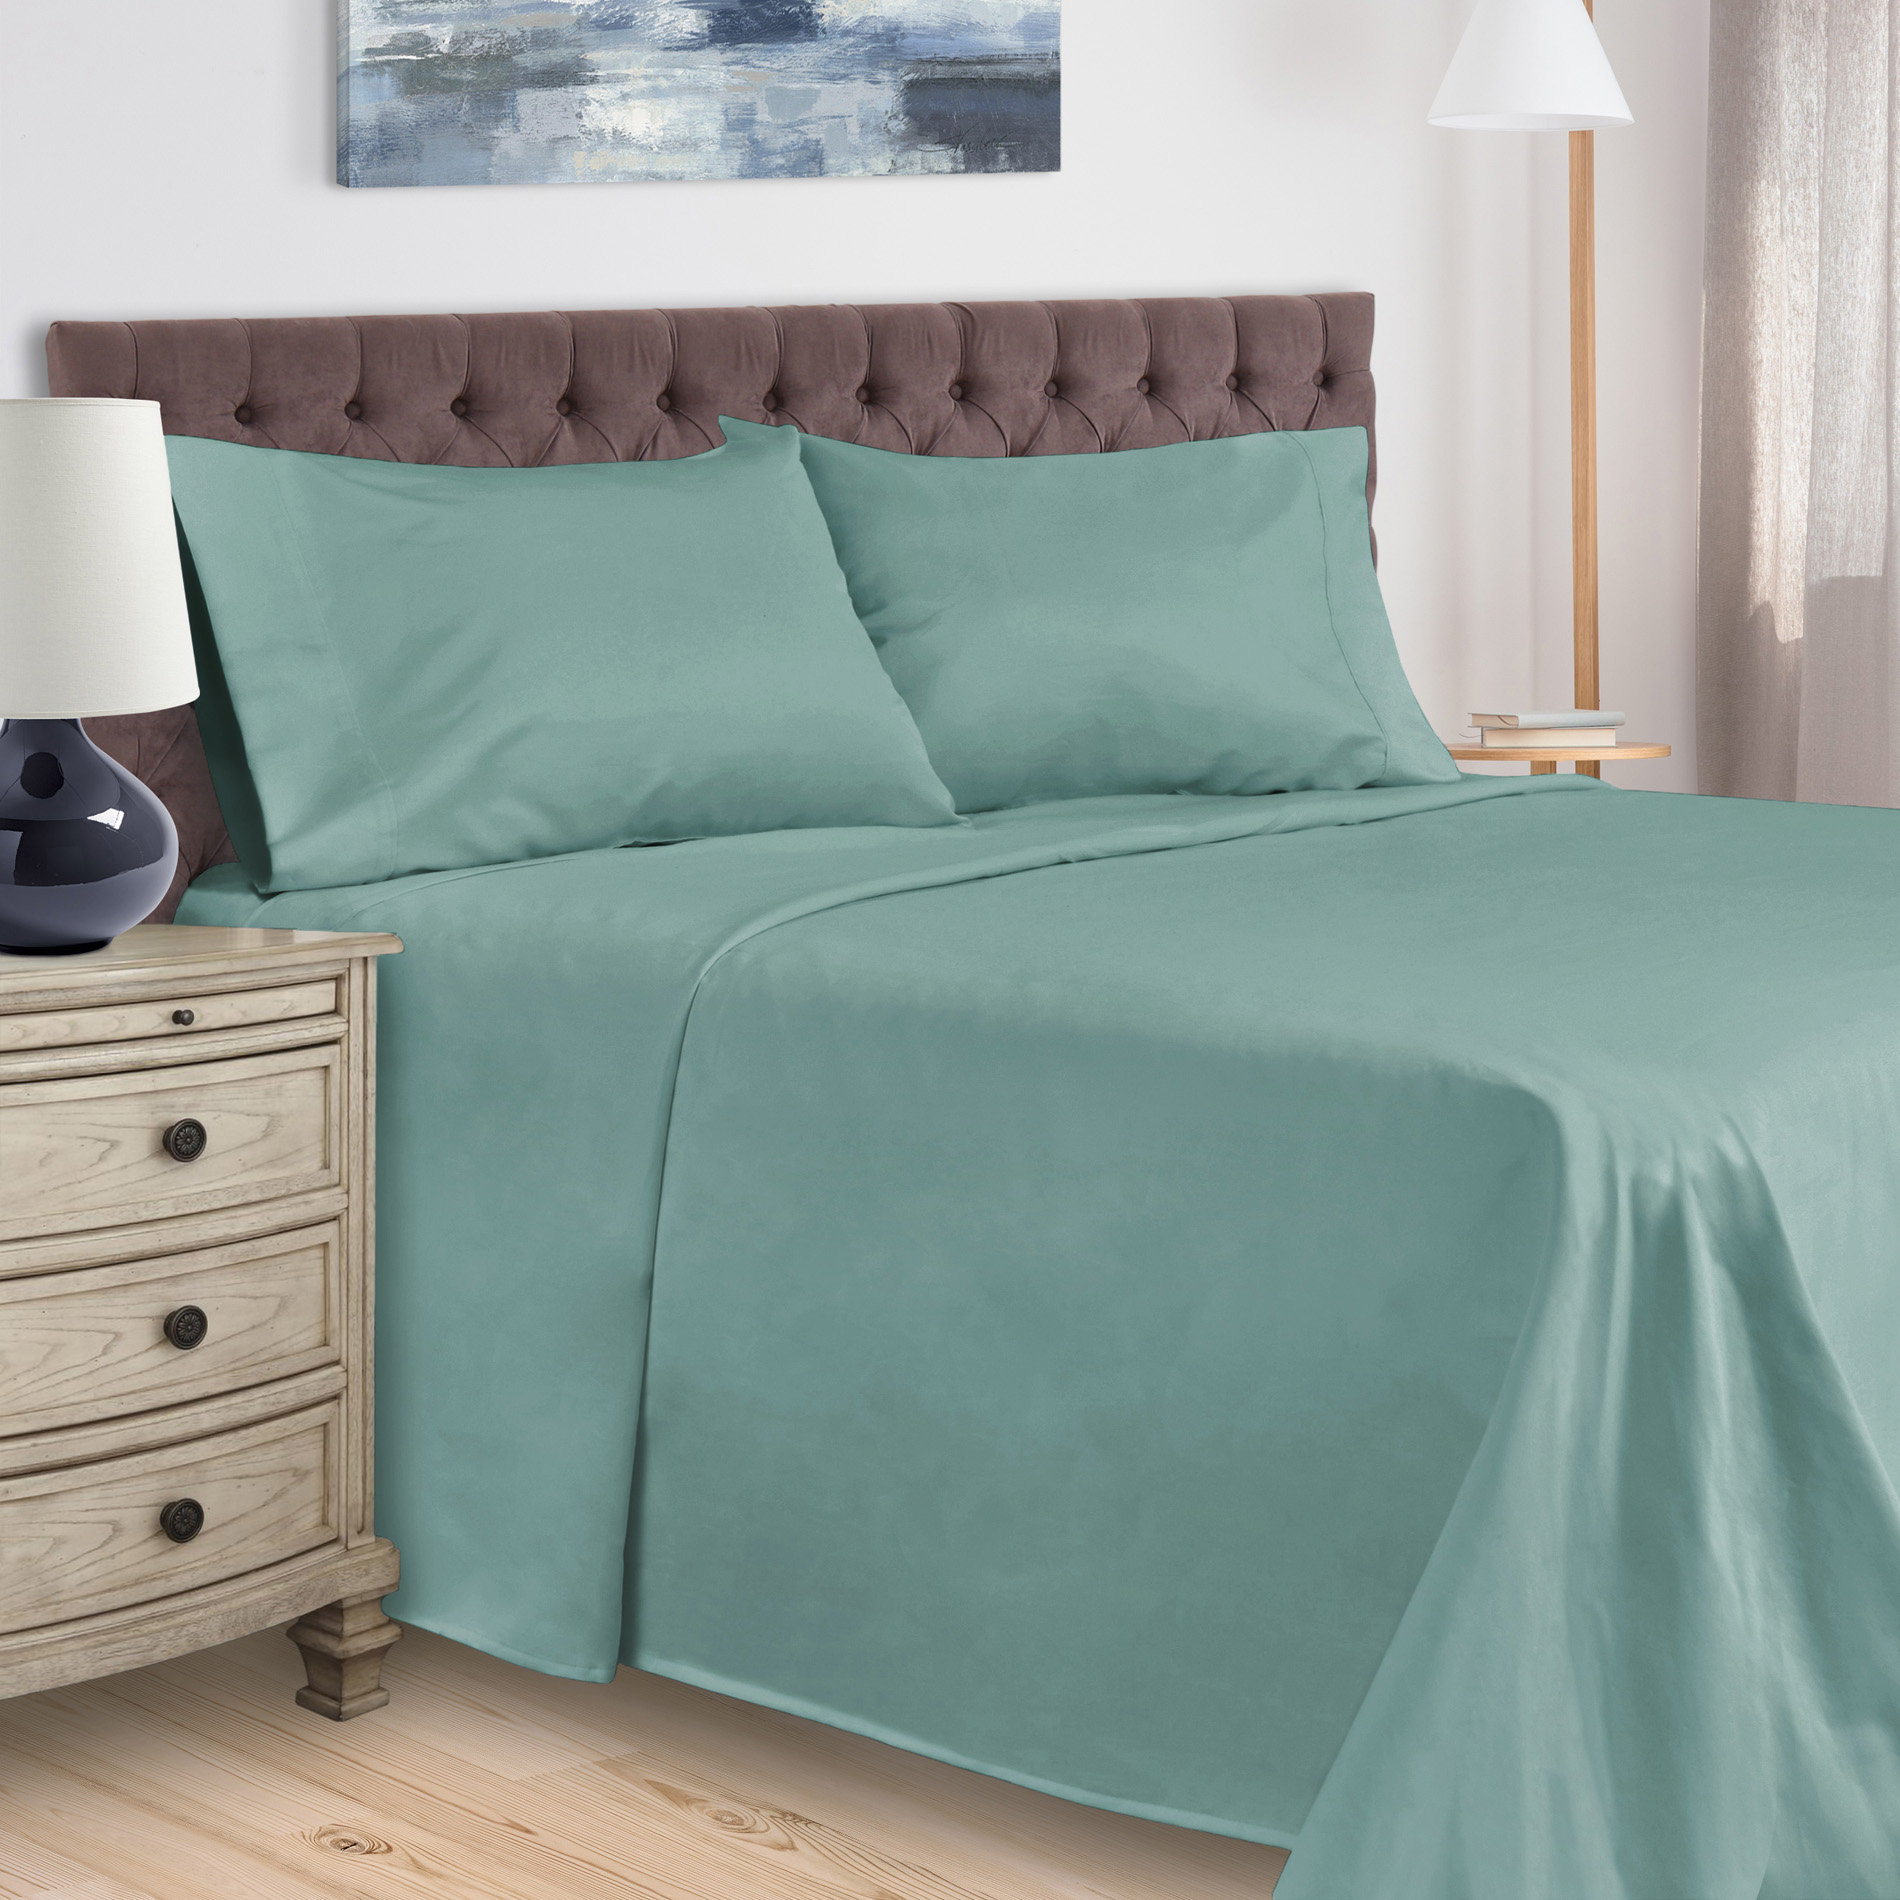 Details about   Tremendous Bedding Fitted Sheet+2 Pillow Case Egyptian Cotton Full XL All Color 